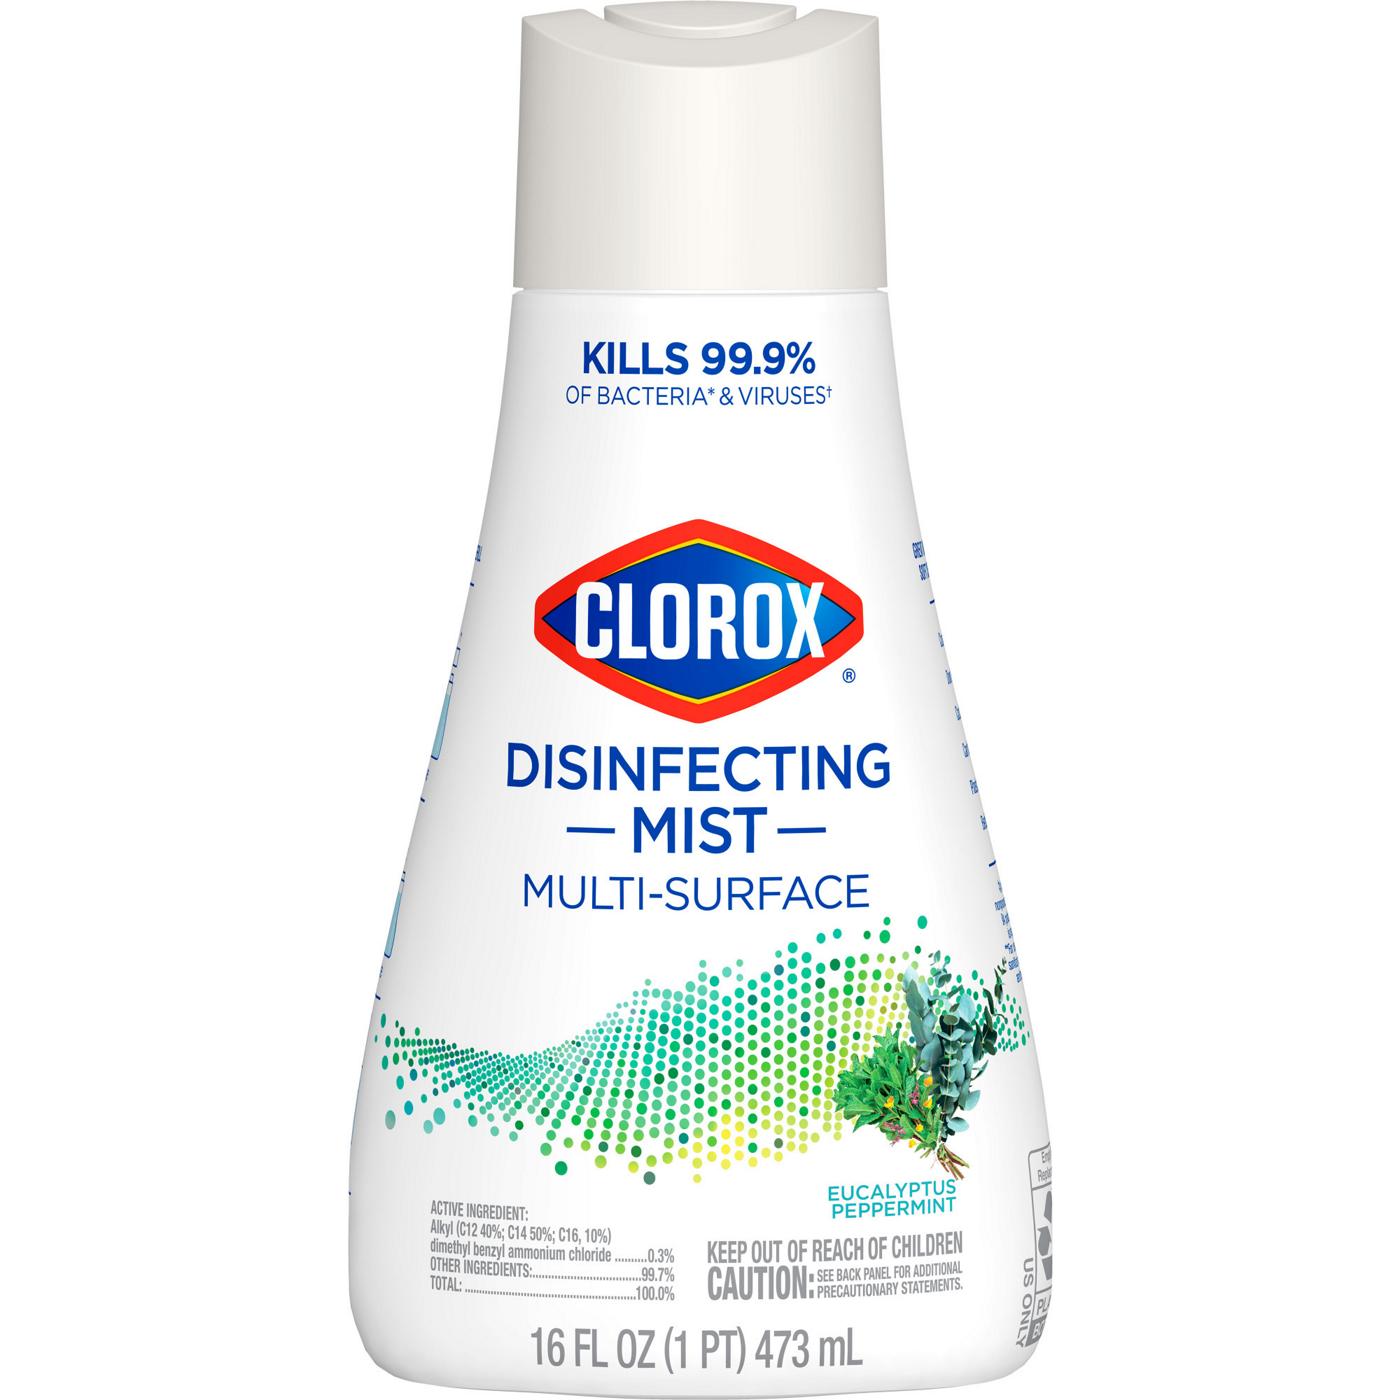 Clorox Eucalyptus Peppermint Multi-Surface Disinfecting Mist Refill; image 1 of 19